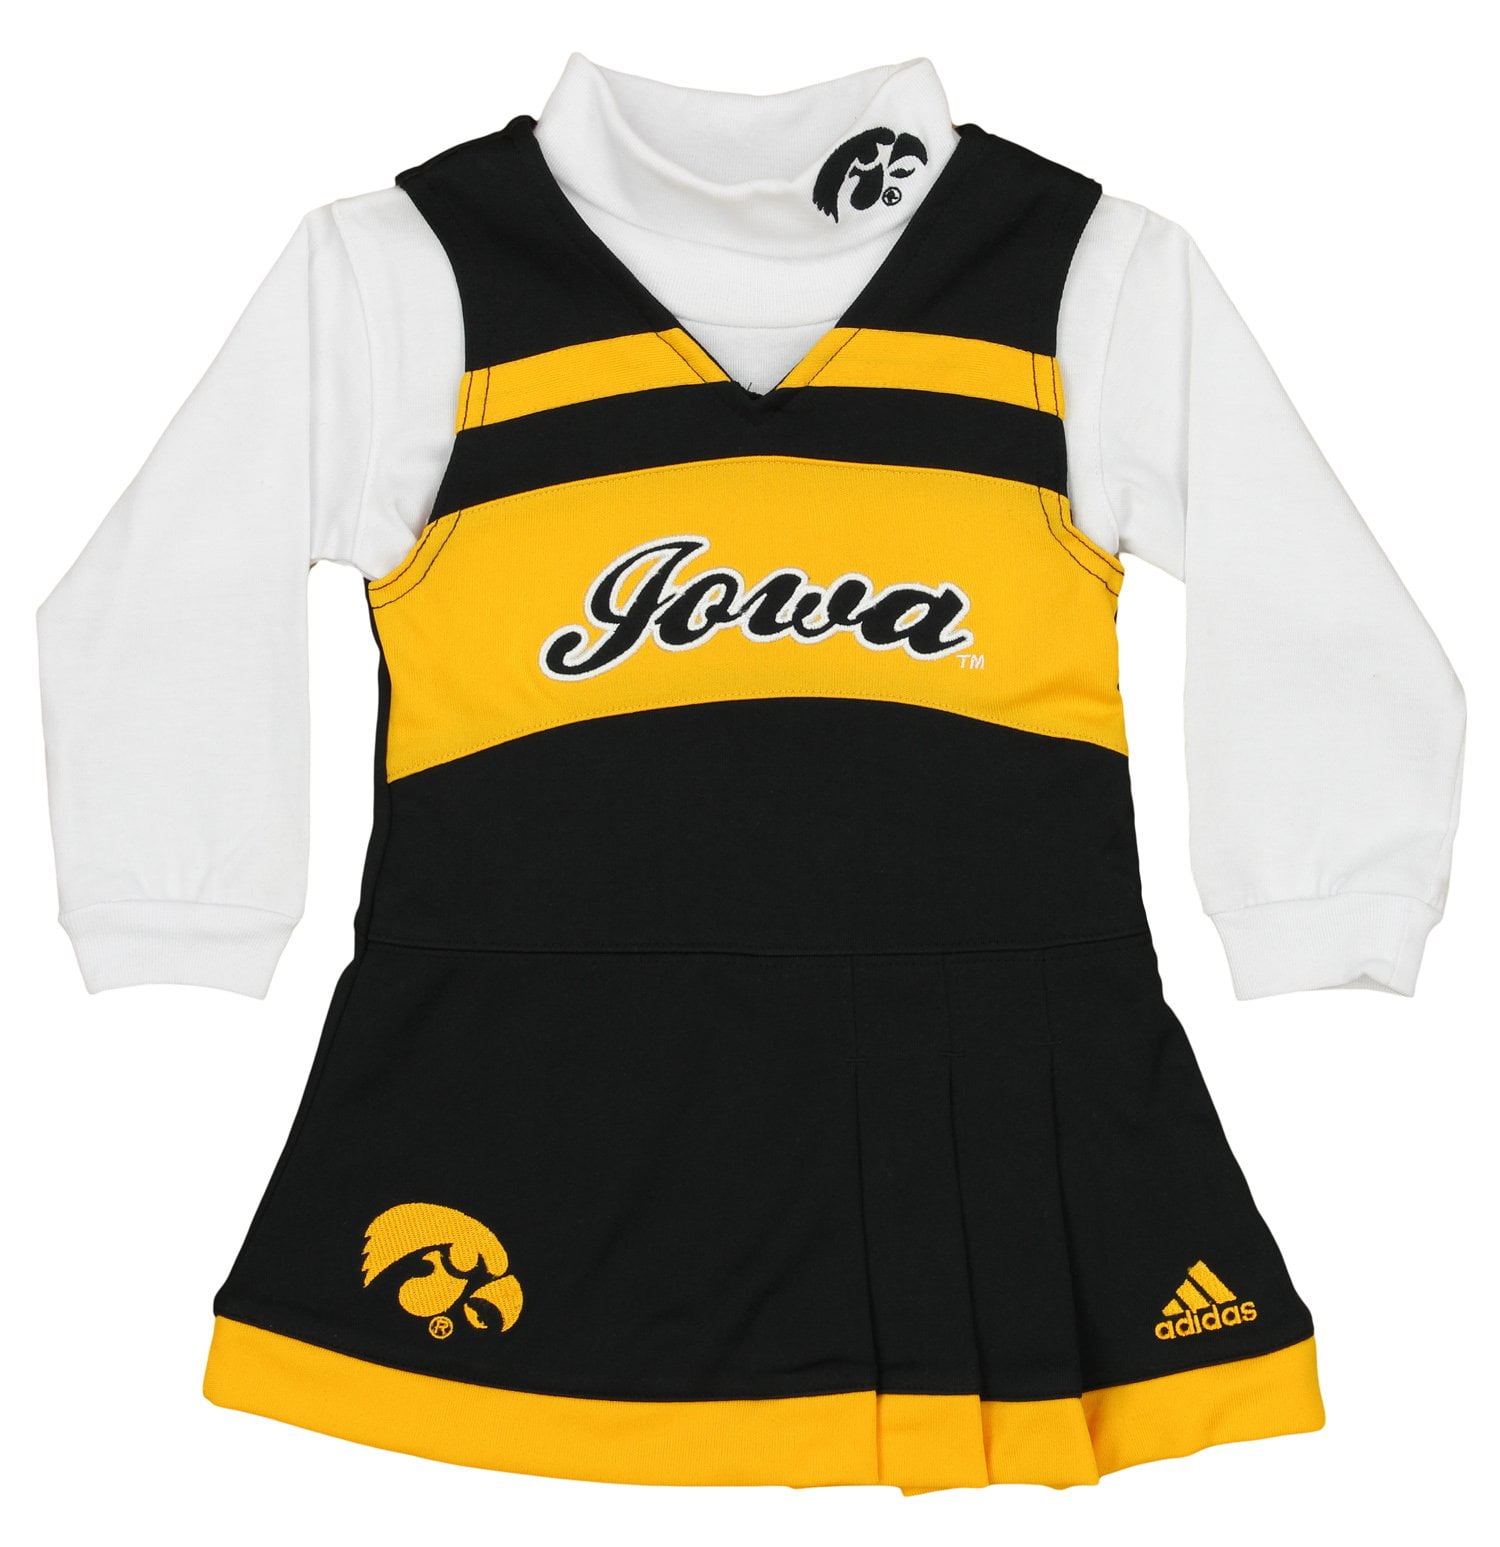 Outerstuff NCAA Infants/Toddlers Iowa State Cyclones Cheer Jumper Dress 24 Months 